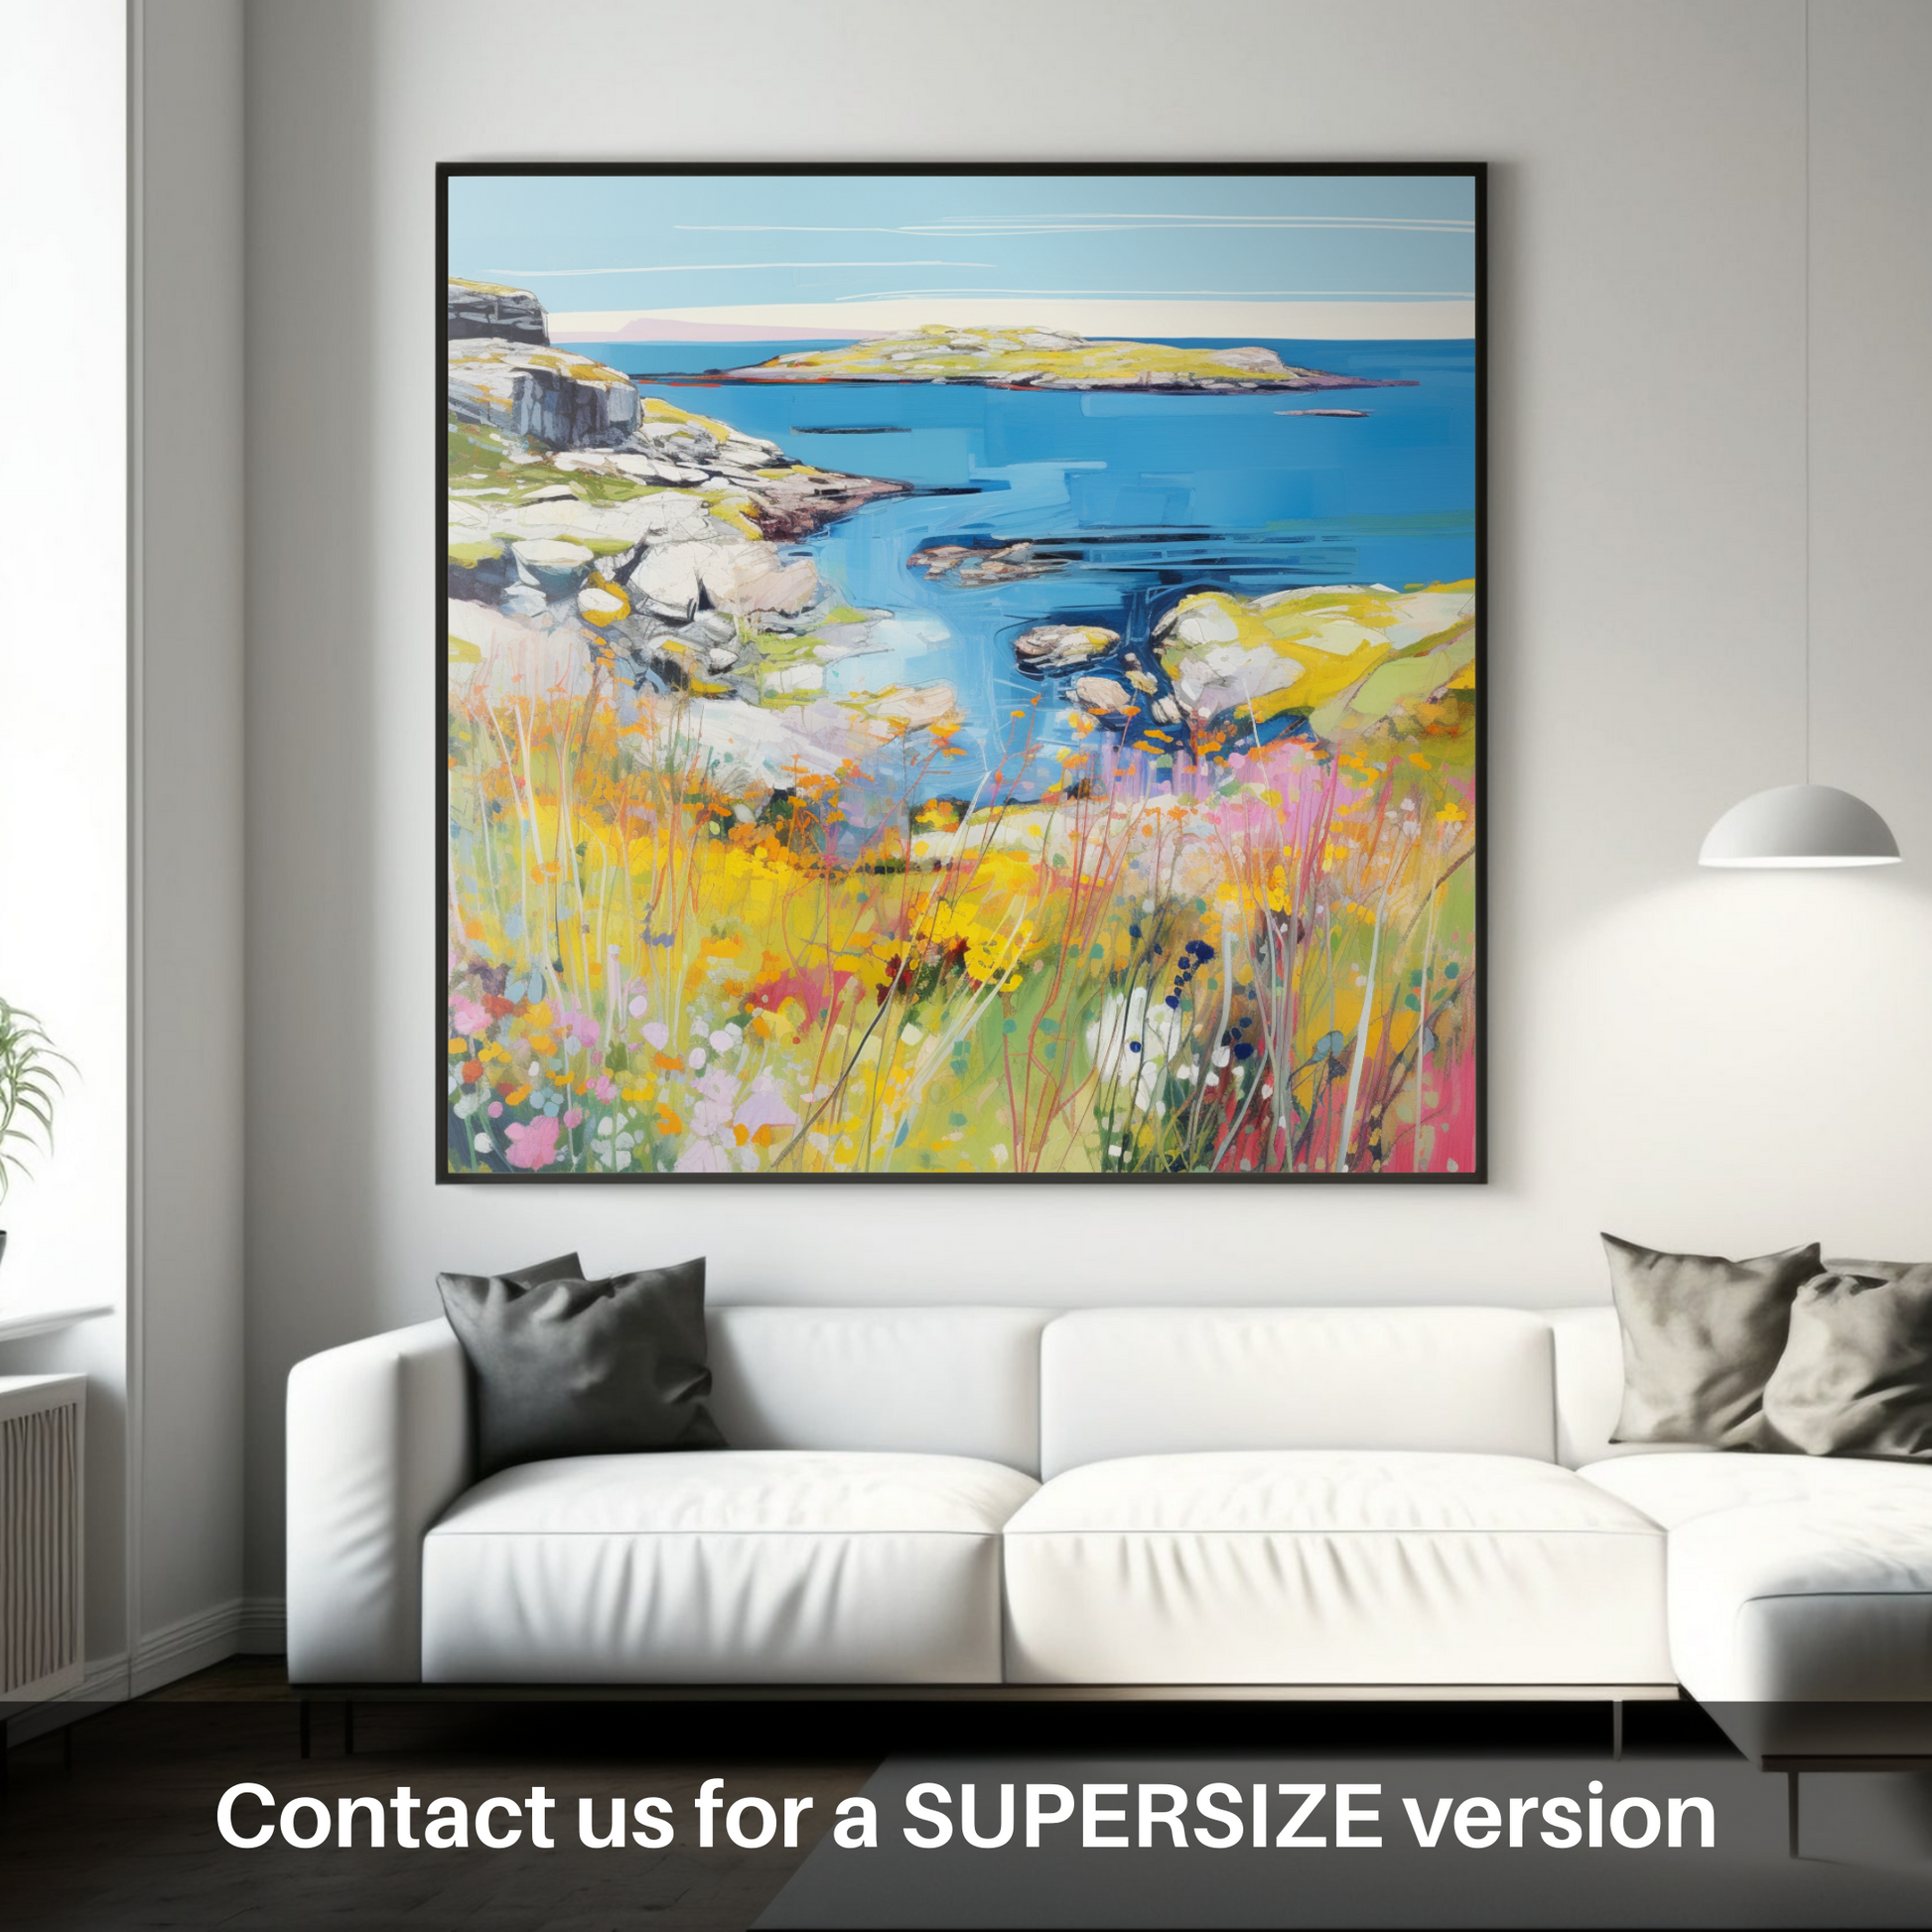 Huge supersize print of Isle of Scalpay, Outer Hebrides in summer